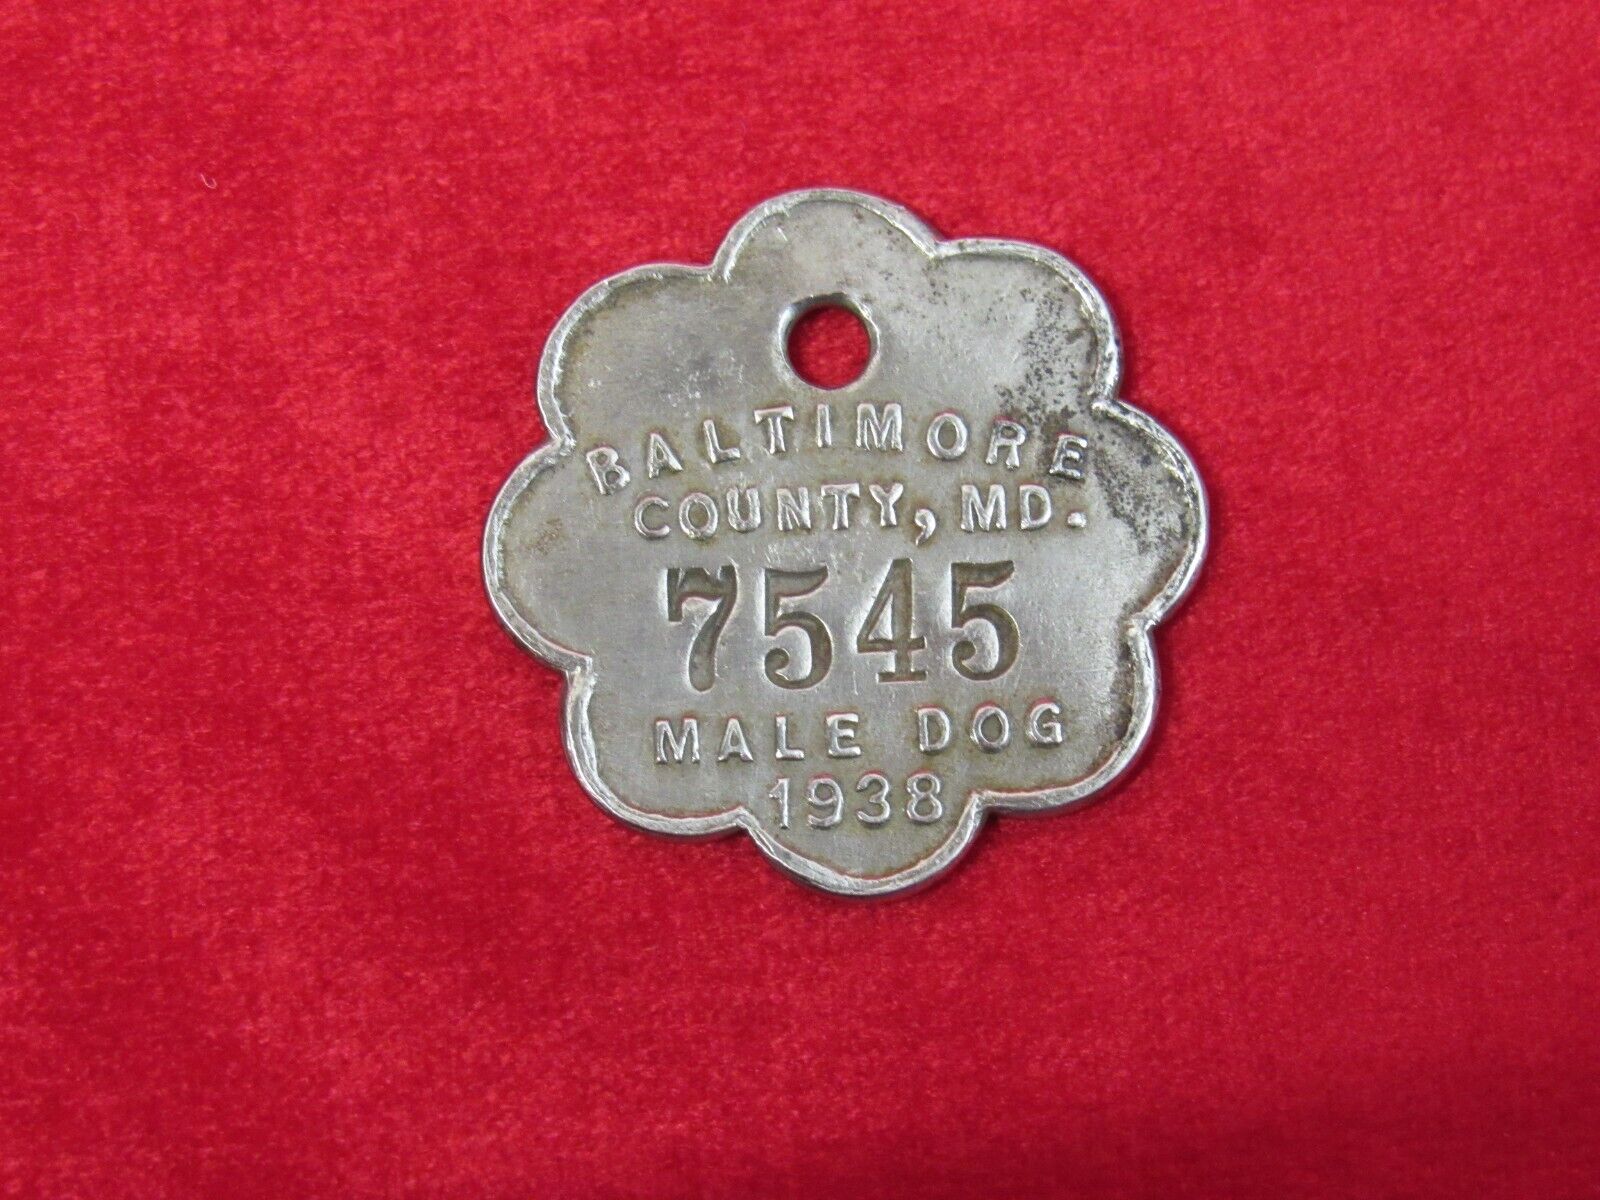 Vintage 1938 Male Dog Tag # 7545 Baltimore County MD.